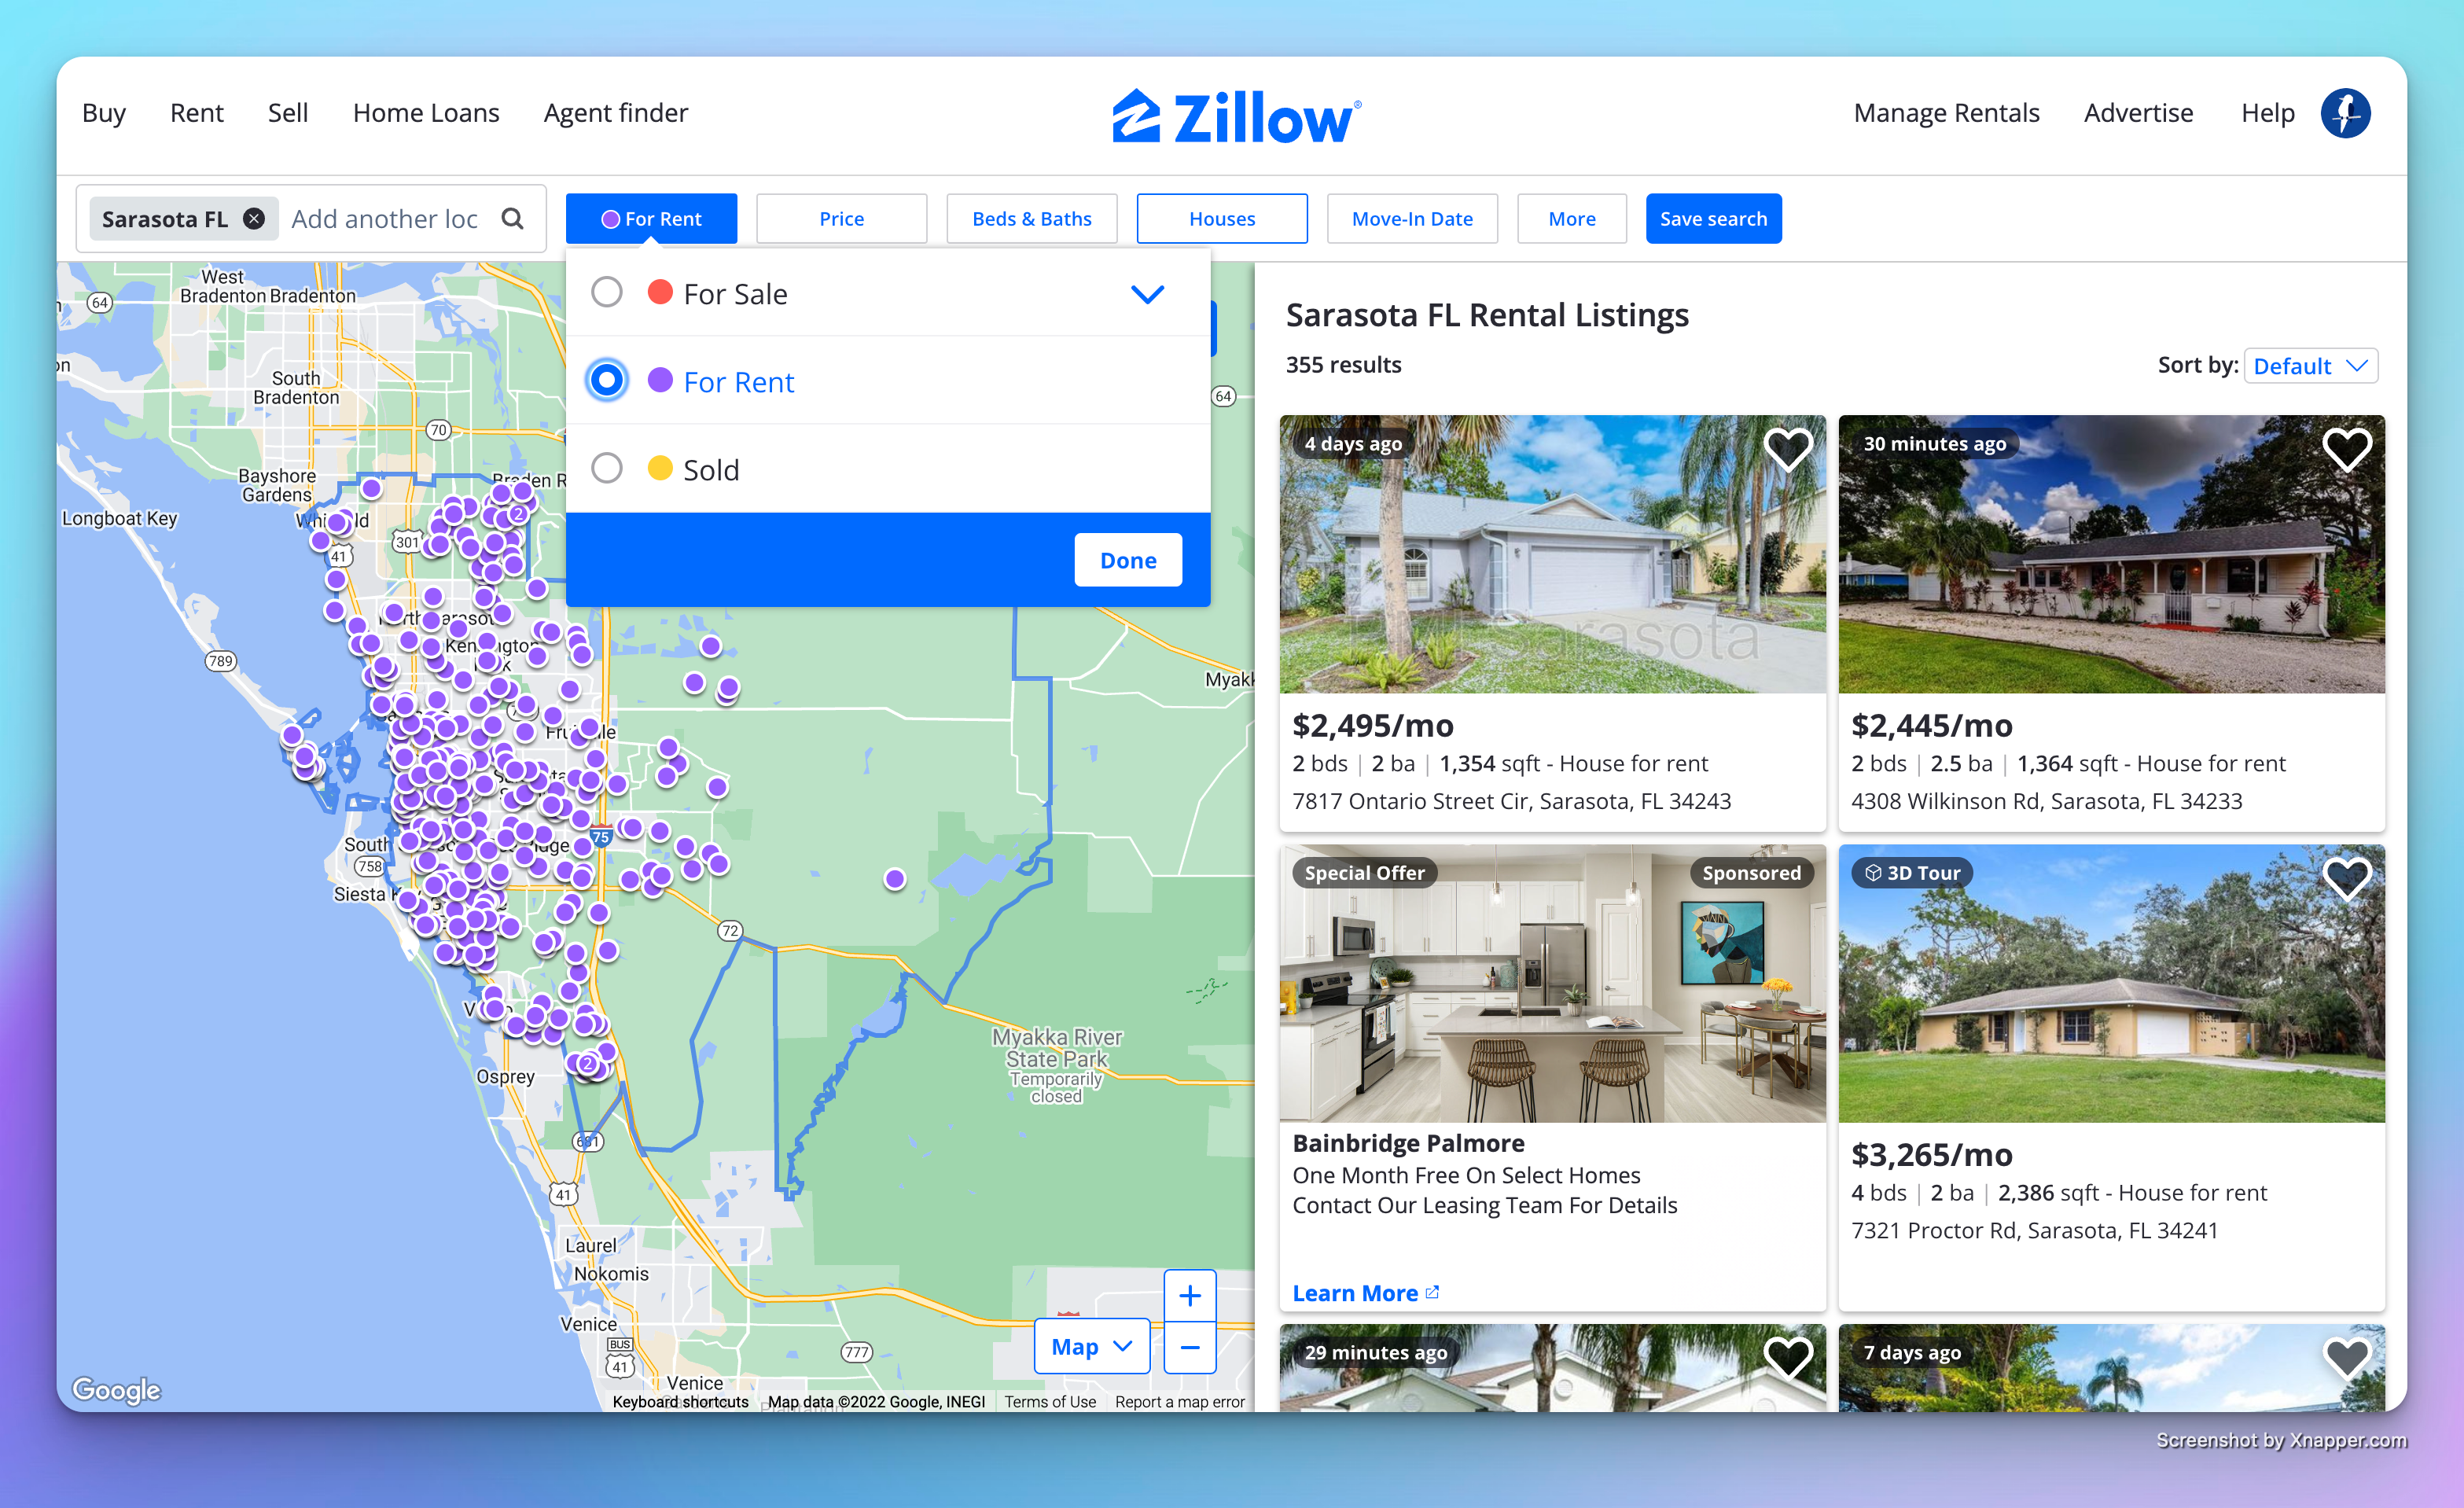 Image of zillow with the for rent category selected